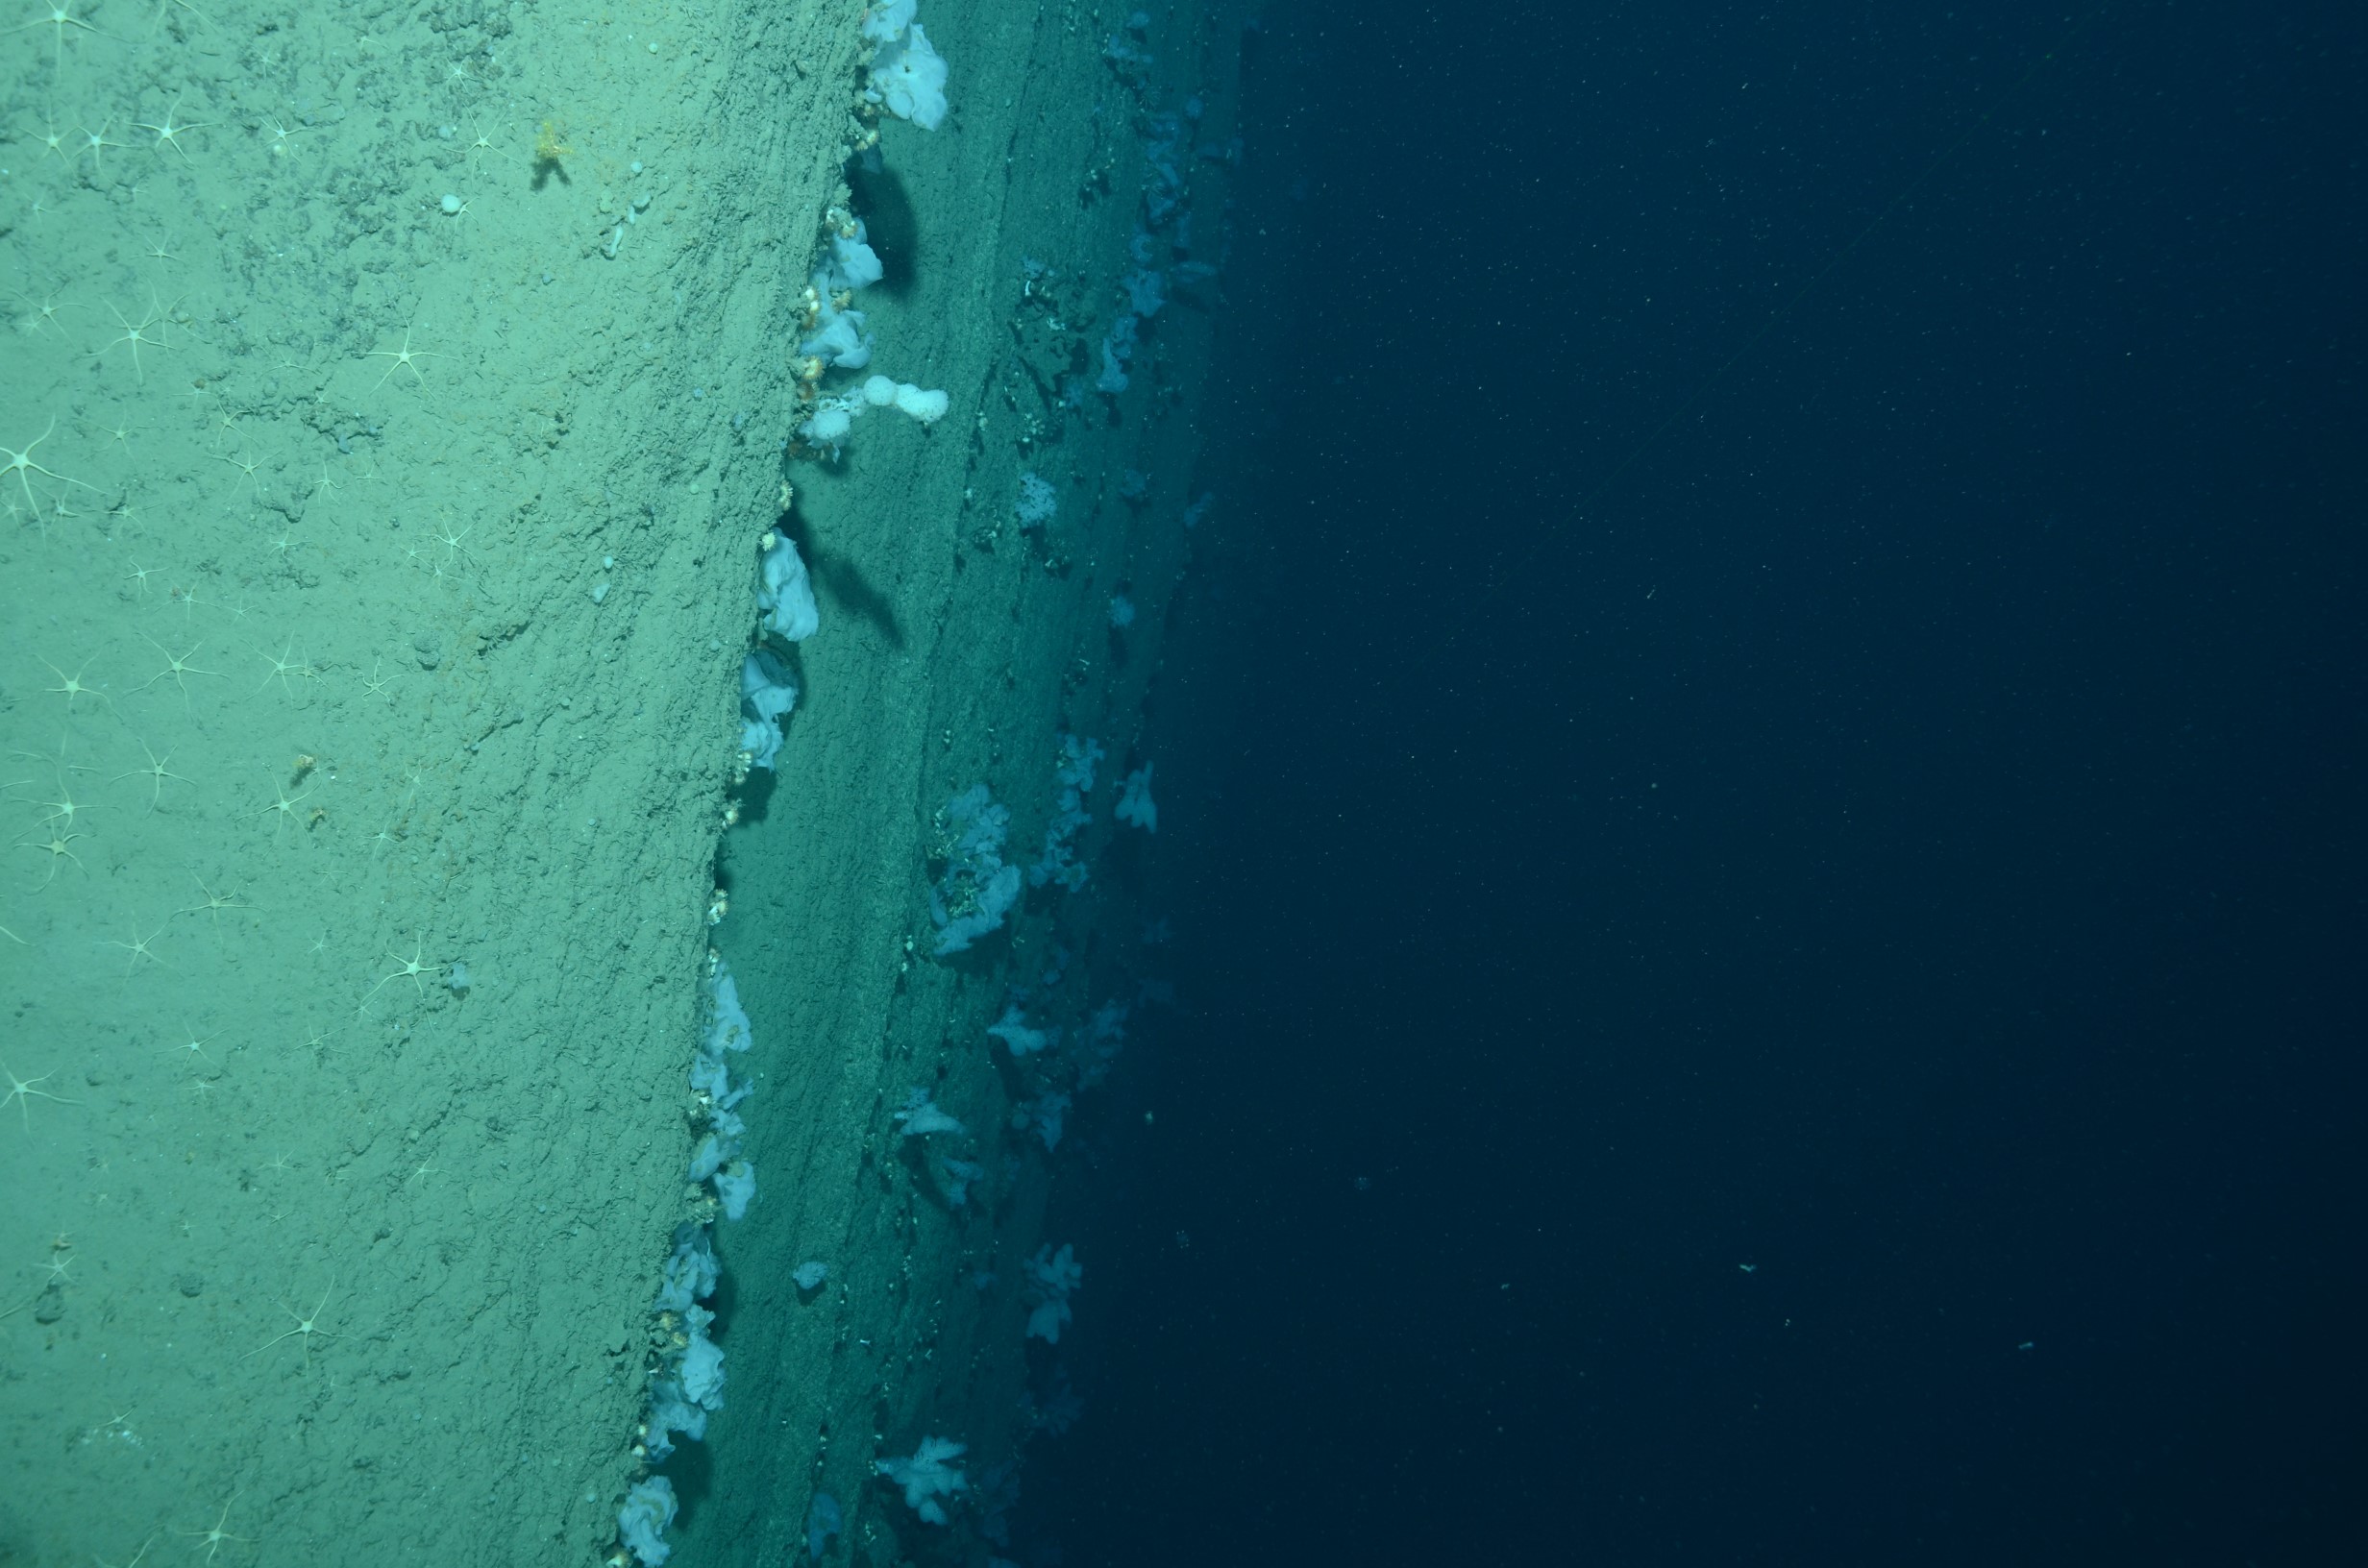 A field of white hexactinellid sponges and solitary cup corals on a vertical wall in Lindenkohl Canyon